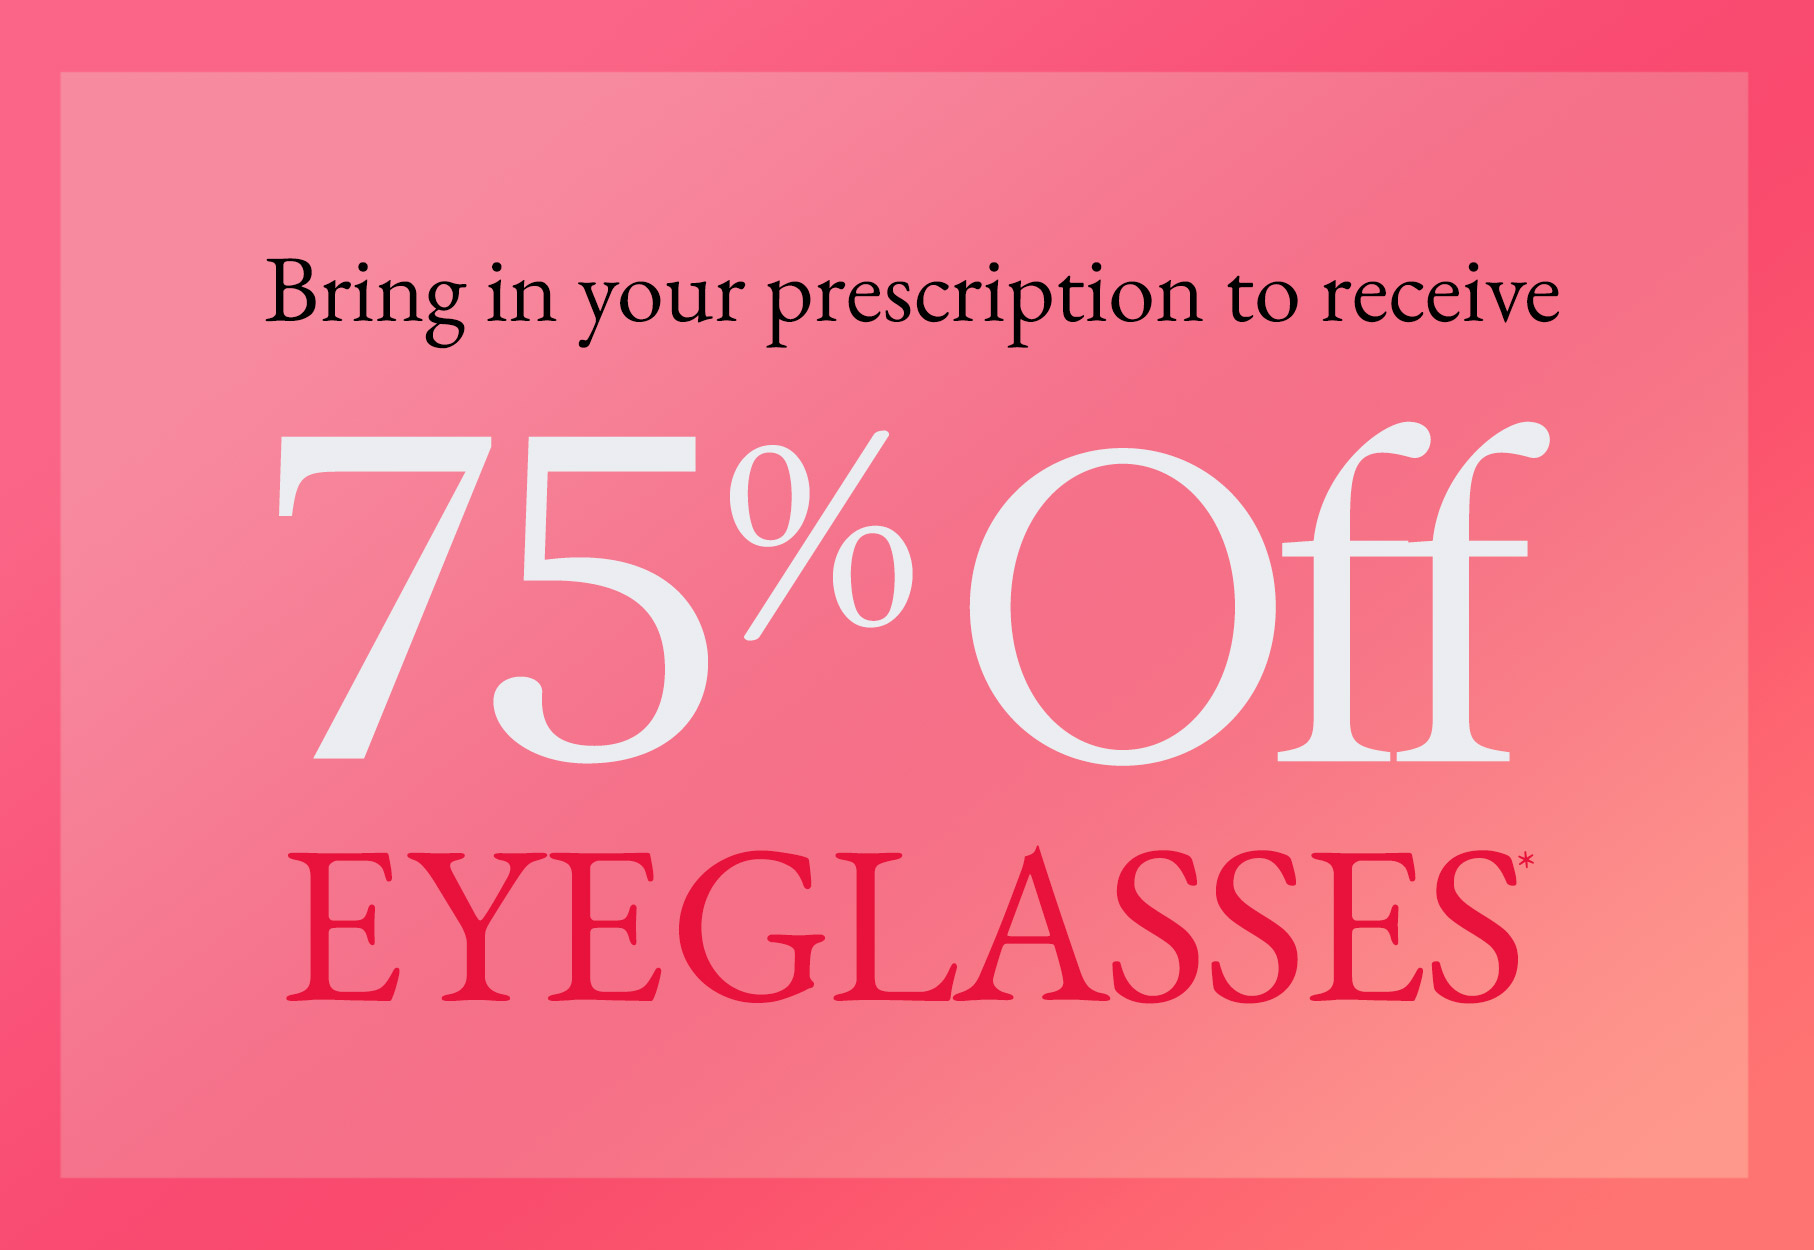 Text: Bring in your prescription to receive 75% off eyeglasses* Photo: Pink border with pink ombre background.